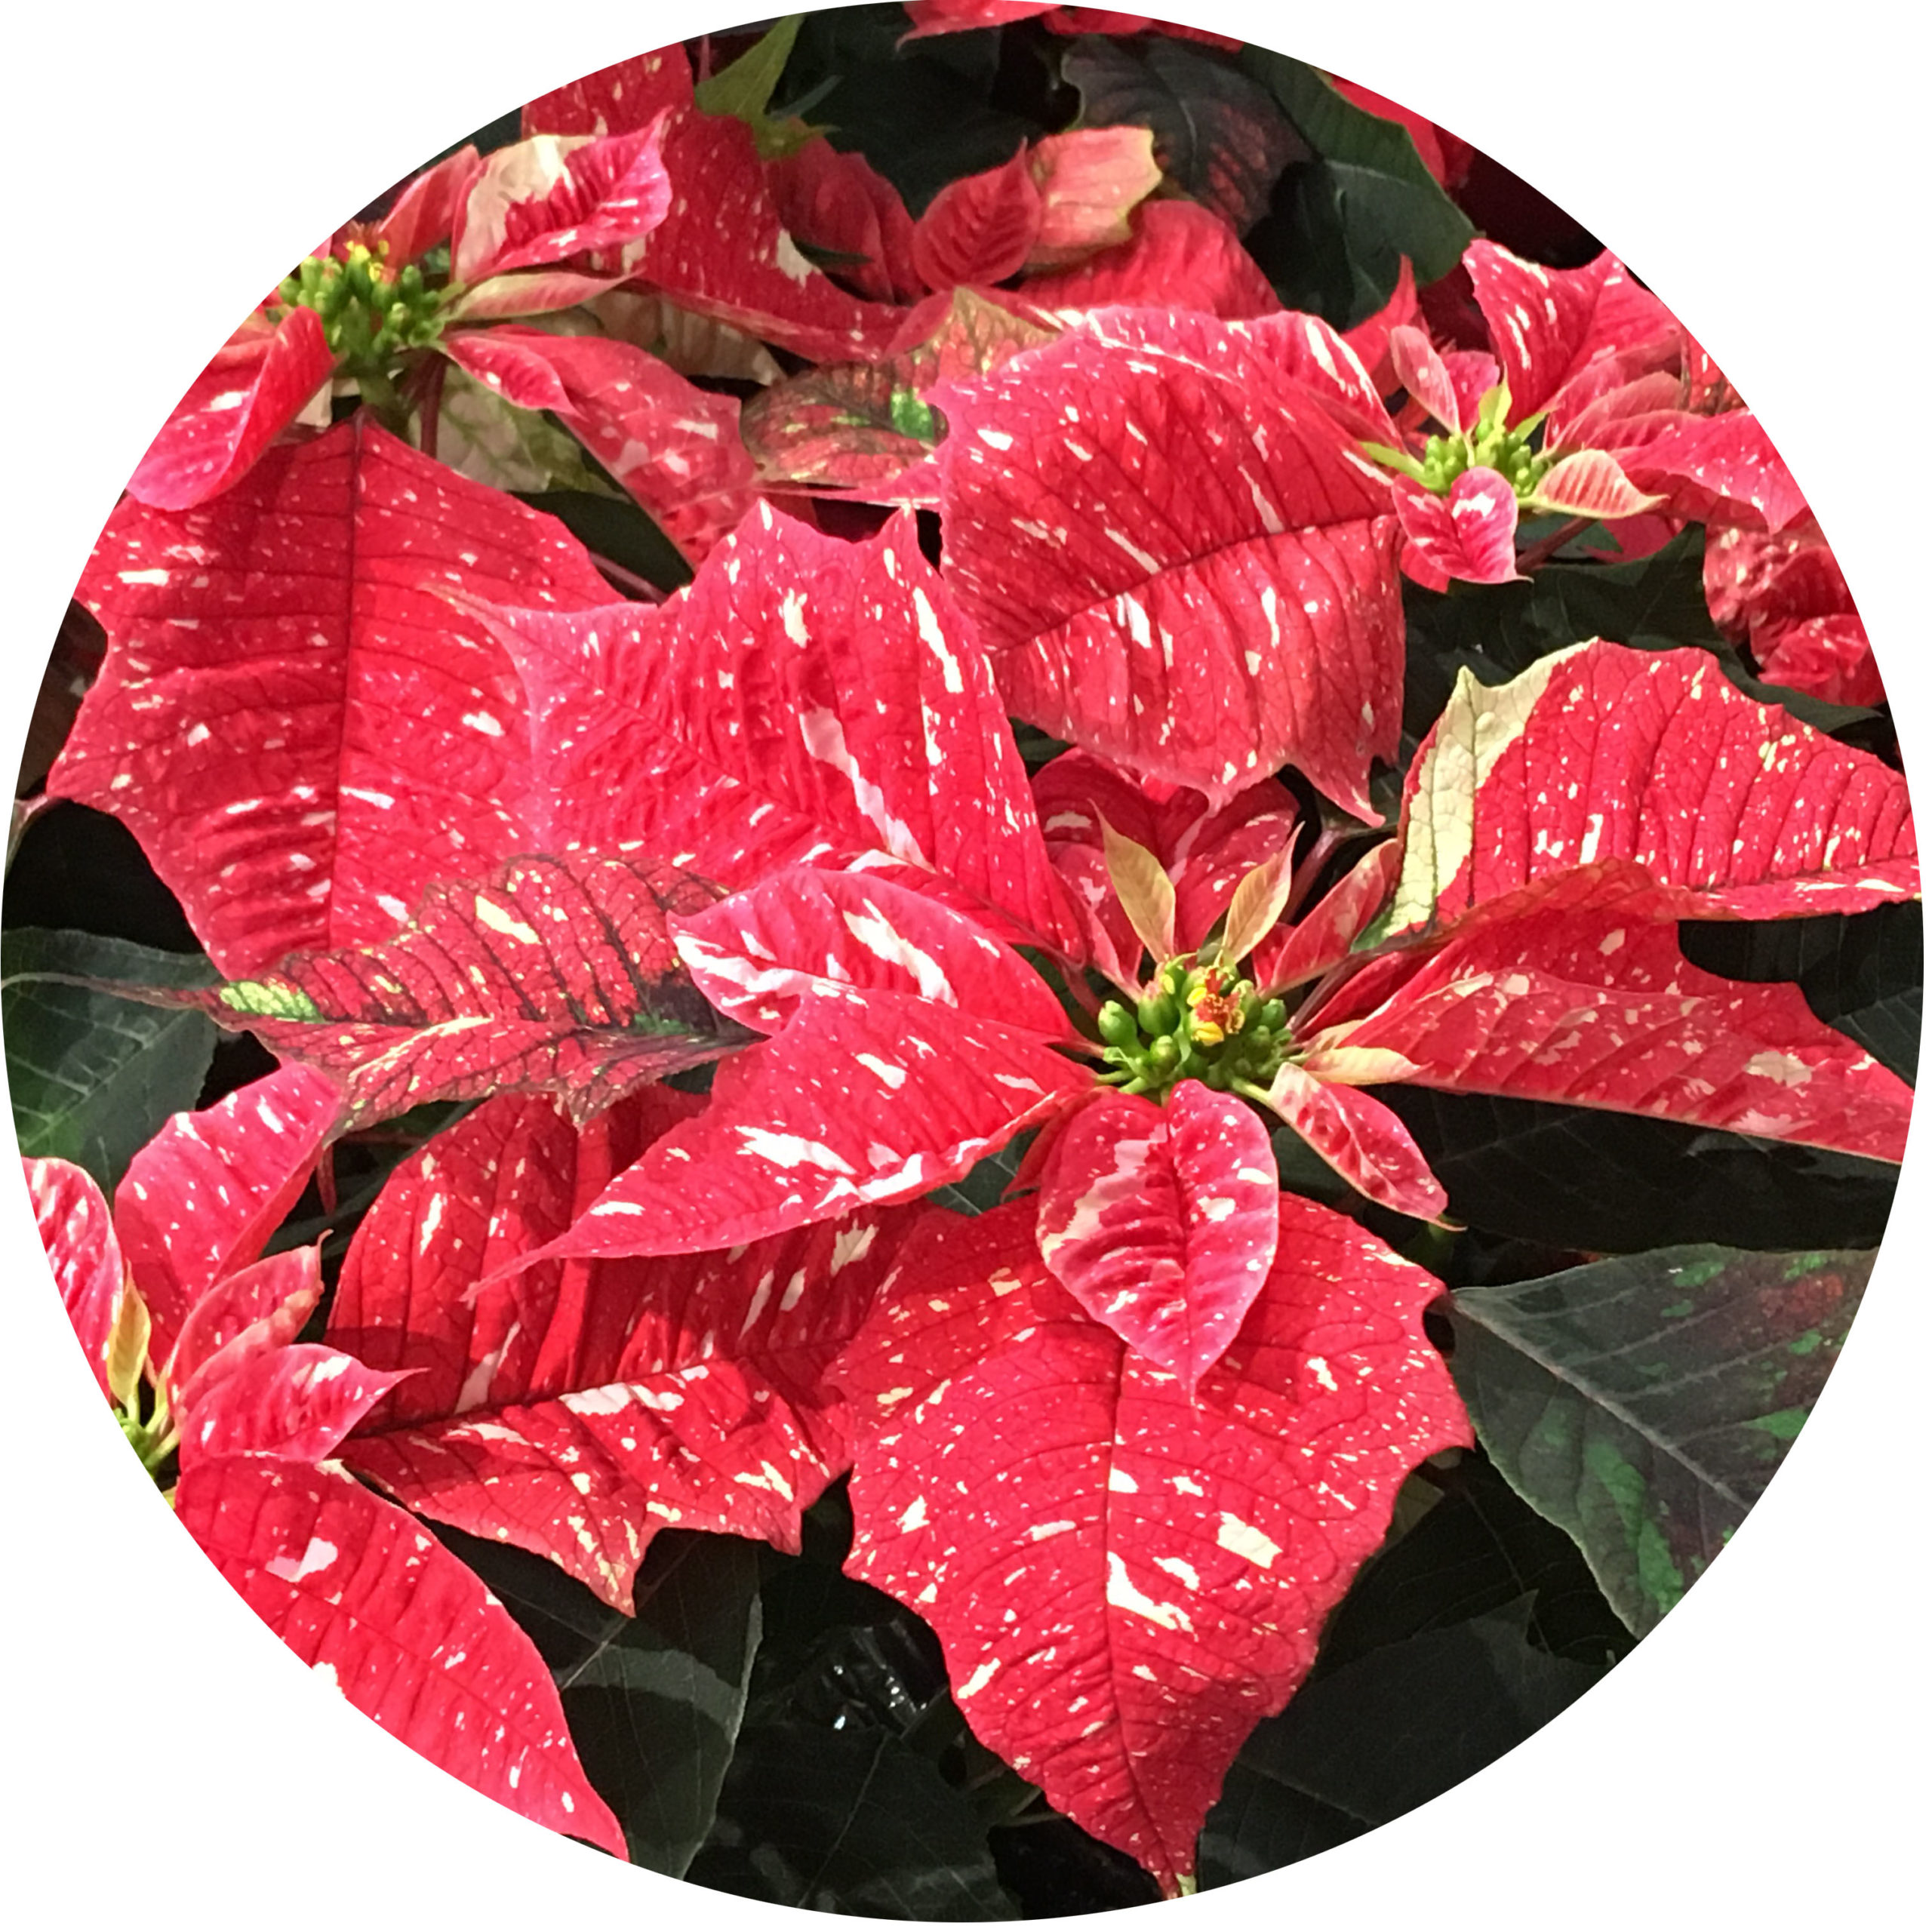 Poinsettia Growing Guide How To Care For Poinsettias Kidsgardening,When Are Strawberries In Season